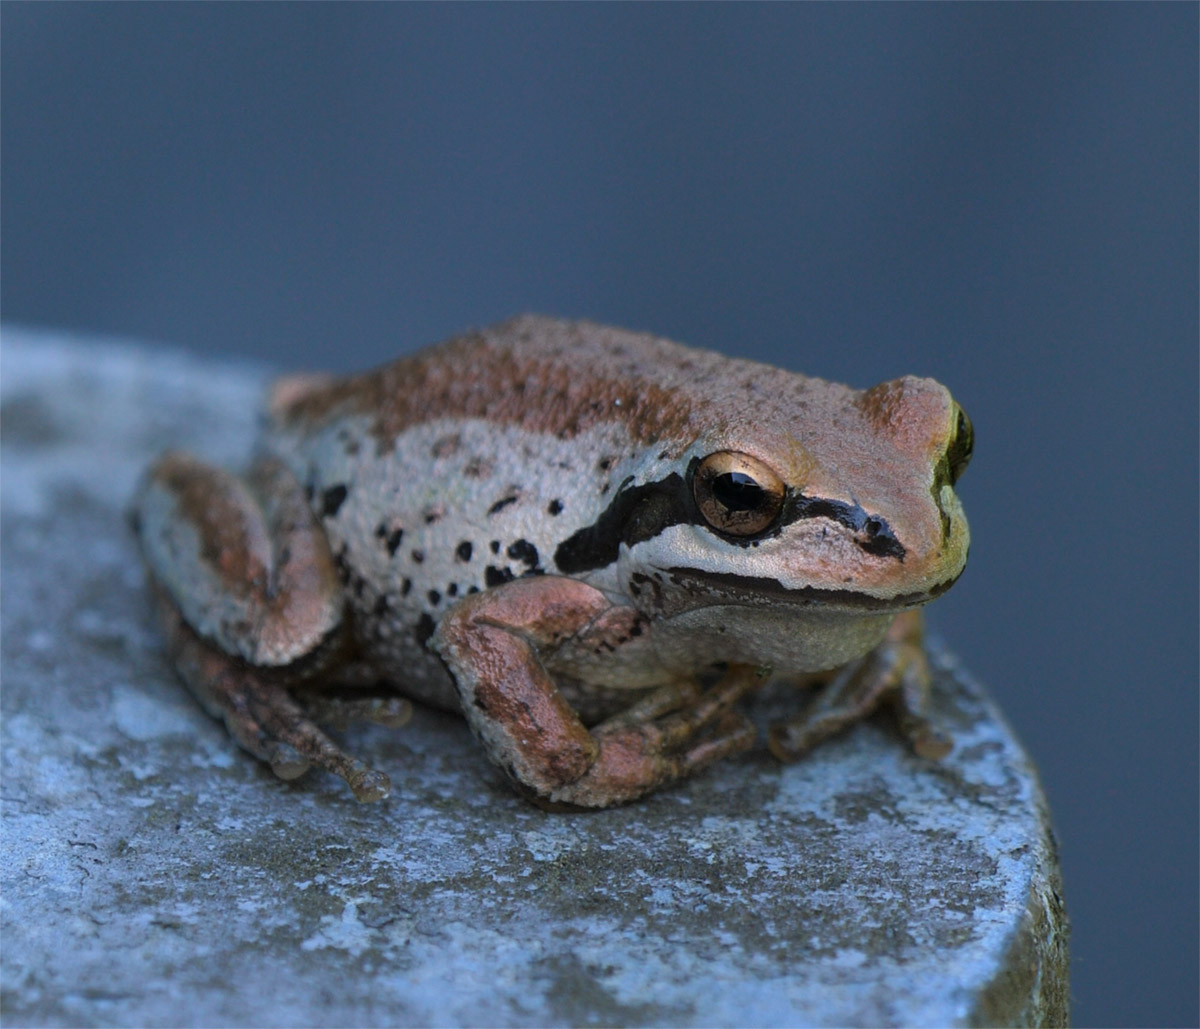 Pacific Tree Frog close-up